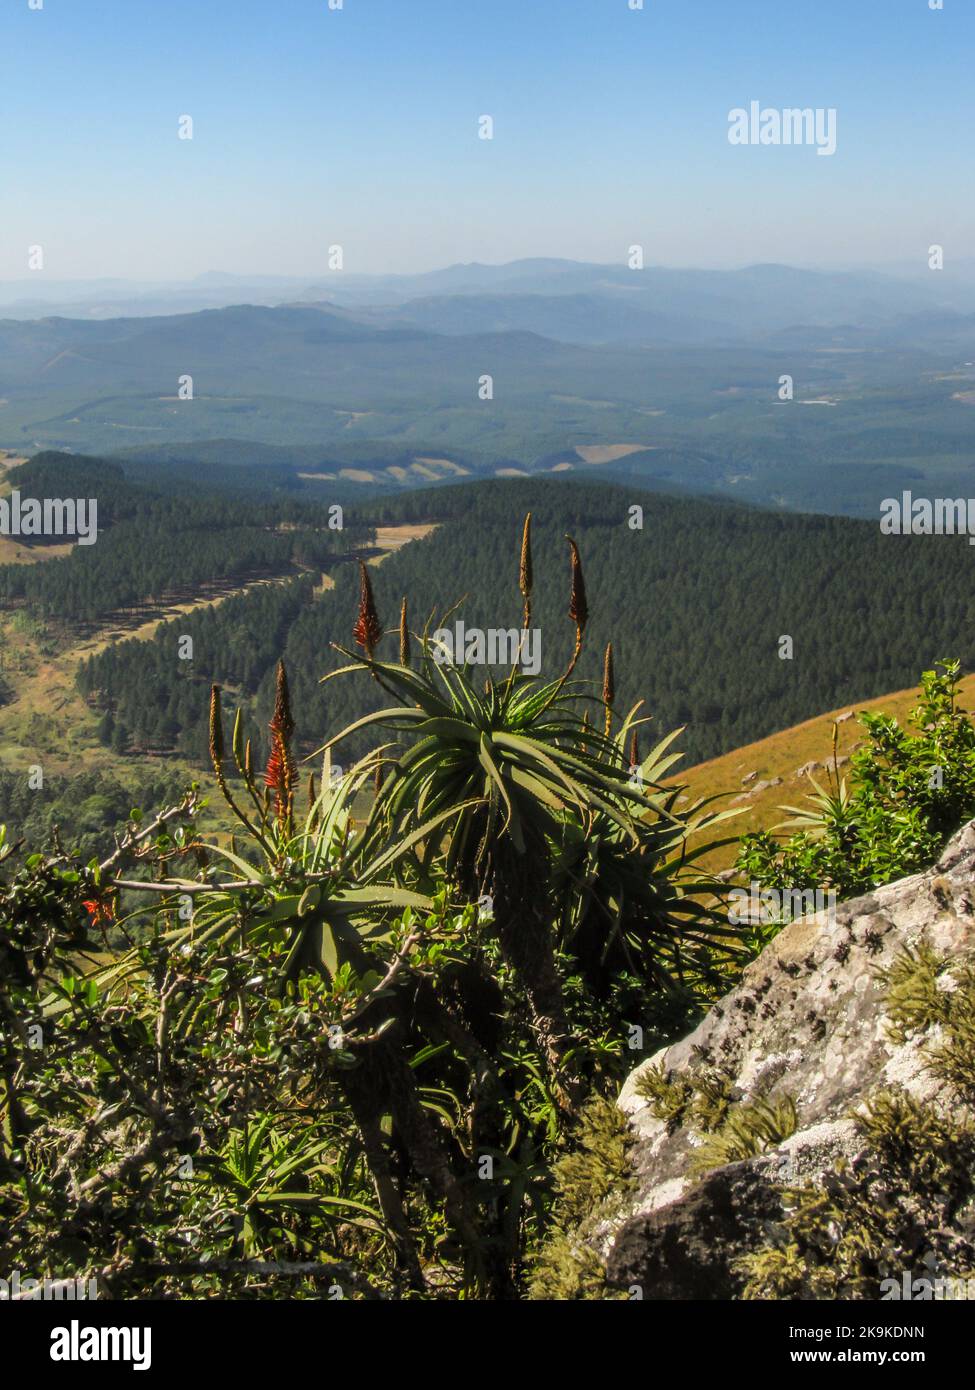 View over the mountains of the Great Escarpment of South Africa, with a flowering aloe in the foreground. Stock Photo